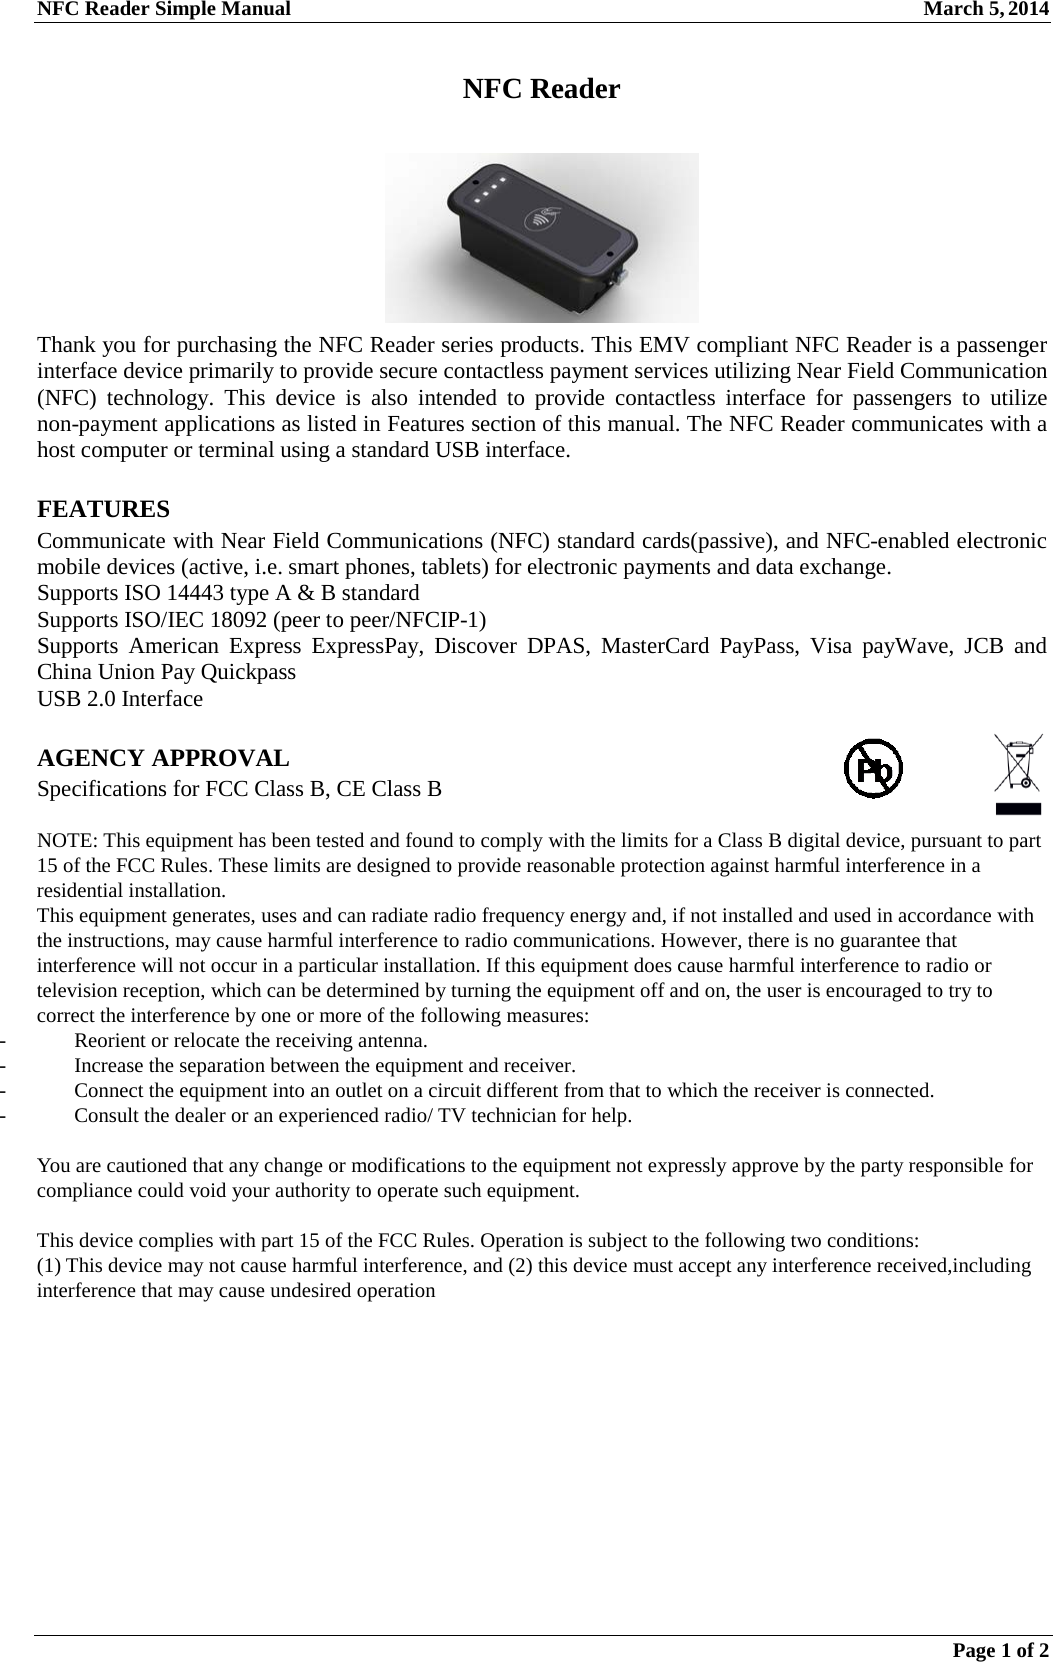 NFC Reader Simple Manual March 5, 2014  Page 1 of 2  NFC Reader   Thank you for purchasing the NFC Reader series products. This EMV compliant NFC Reader is a passenger interface device primarily to provide secure contactless payment services utilizing Near Field Communication (NFC) technology. This device is also intended to provide contactless interface for passengers to utilize non-payment applications as listed in Features section of this manual. The NFC Reader communicates with a host computer or terminal using a standard USB interface.  FEATURES Communicate with Near Field Communications (NFC) standard cards(passive), and NFC-enabled electronic mobile devices (active, i.e. smart phones, tablets) for electronic payments and data exchange. Supports ISO 14443 type A &amp; B standard Supports ISO/IEC 18092 (peer to peer/NFCIP-1) Supports  American Express ExpressPay, Discover DPAS, MasterCard PayPass, Visa payWave, JCB and China Union Pay Quickpass USB 2.0 Interface  AGENCY APPROVAL Specifications for FCC Class B, CE Class B  NOTE: This equipment has been tested and found to comply with the limits for a Class B digital device, pursuant to part 15 of the FCC Rules. These limits are designed to provide reasonable protection against harmful interference in a residential installation. This equipment generates, uses and can radiate radio frequency energy and, if not installed and used in accordance with the instructions, may cause harmful interference to radio communications. However, there is no guarantee that interference will not occur in a particular installation. If this equipment does cause harmful interference to radio or television reception, which can be determined by turning the equipment off and on, the user is encouraged to try to correct the interference by one or more of the following measures: - Reorient or relocate the receiving antenna. - Increase the separation between the equipment and receiver. - Connect the equipment into an outlet on a circuit different from that to which the receiver is connected. - Consult the dealer or an experienced radio/ TV technician for help.  You are cautioned that any change or modifications to the equipment not expressly approve by the party responsible for compliance could void your authority to operate such equipment.  This device complies with part 15 of the FCC Rules. Operation is subject to the following two conditions: (1) This device may not cause harmful interference, and (2) this device must accept any interference received,including interference that may cause undesired operation 